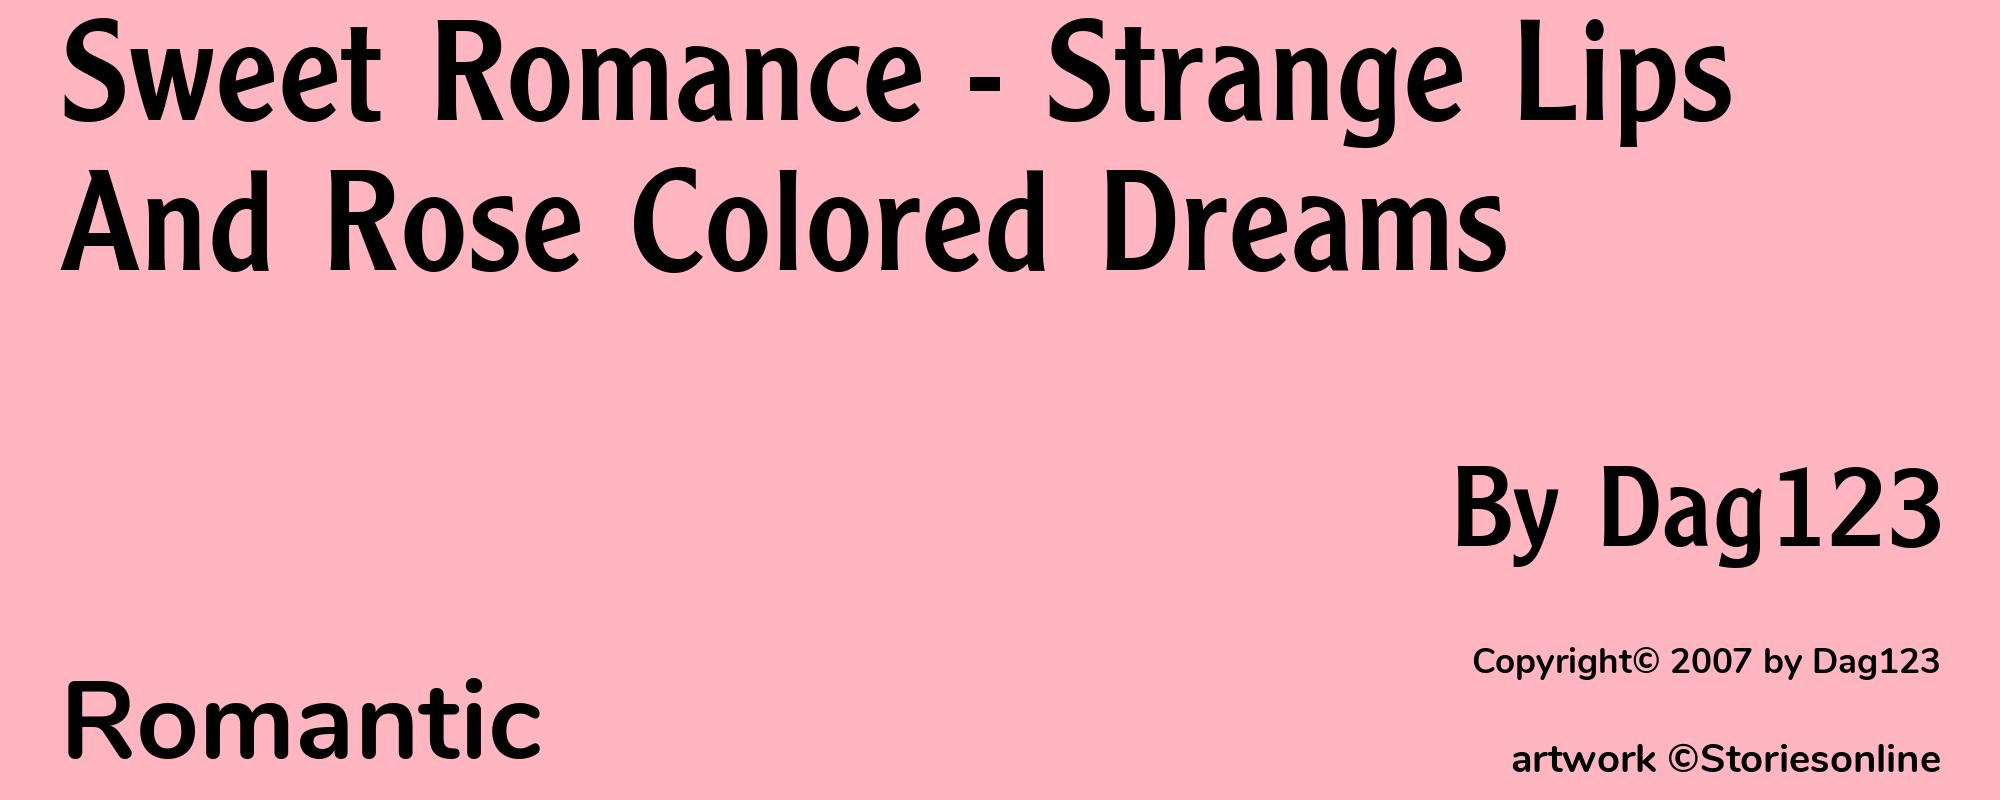 Sweet Romance - Strange Lips And Rose Colored Dreams - Cover